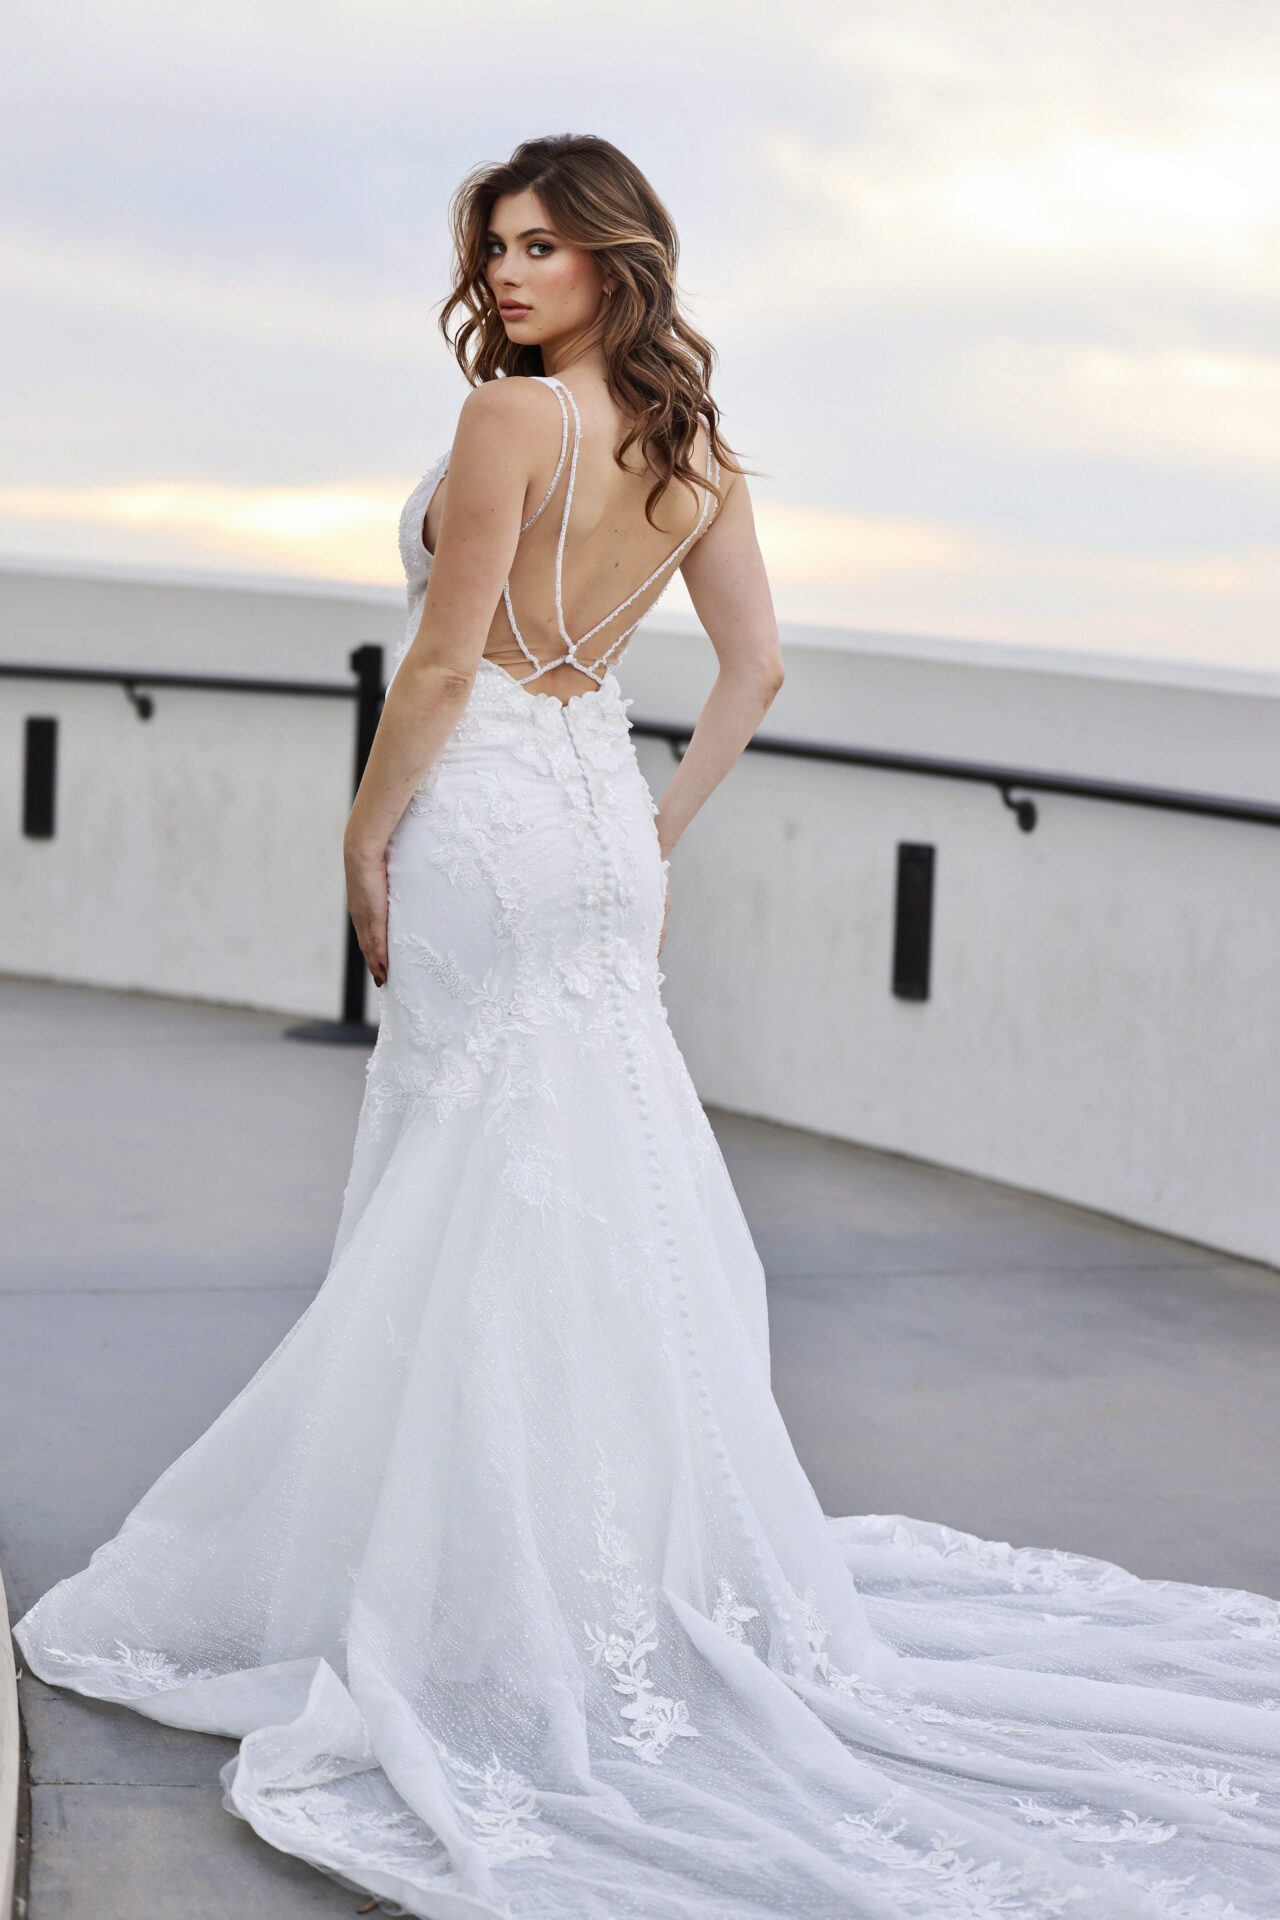 Shimmering Lace Wedding Dress with Strappy Back - Martina Liana